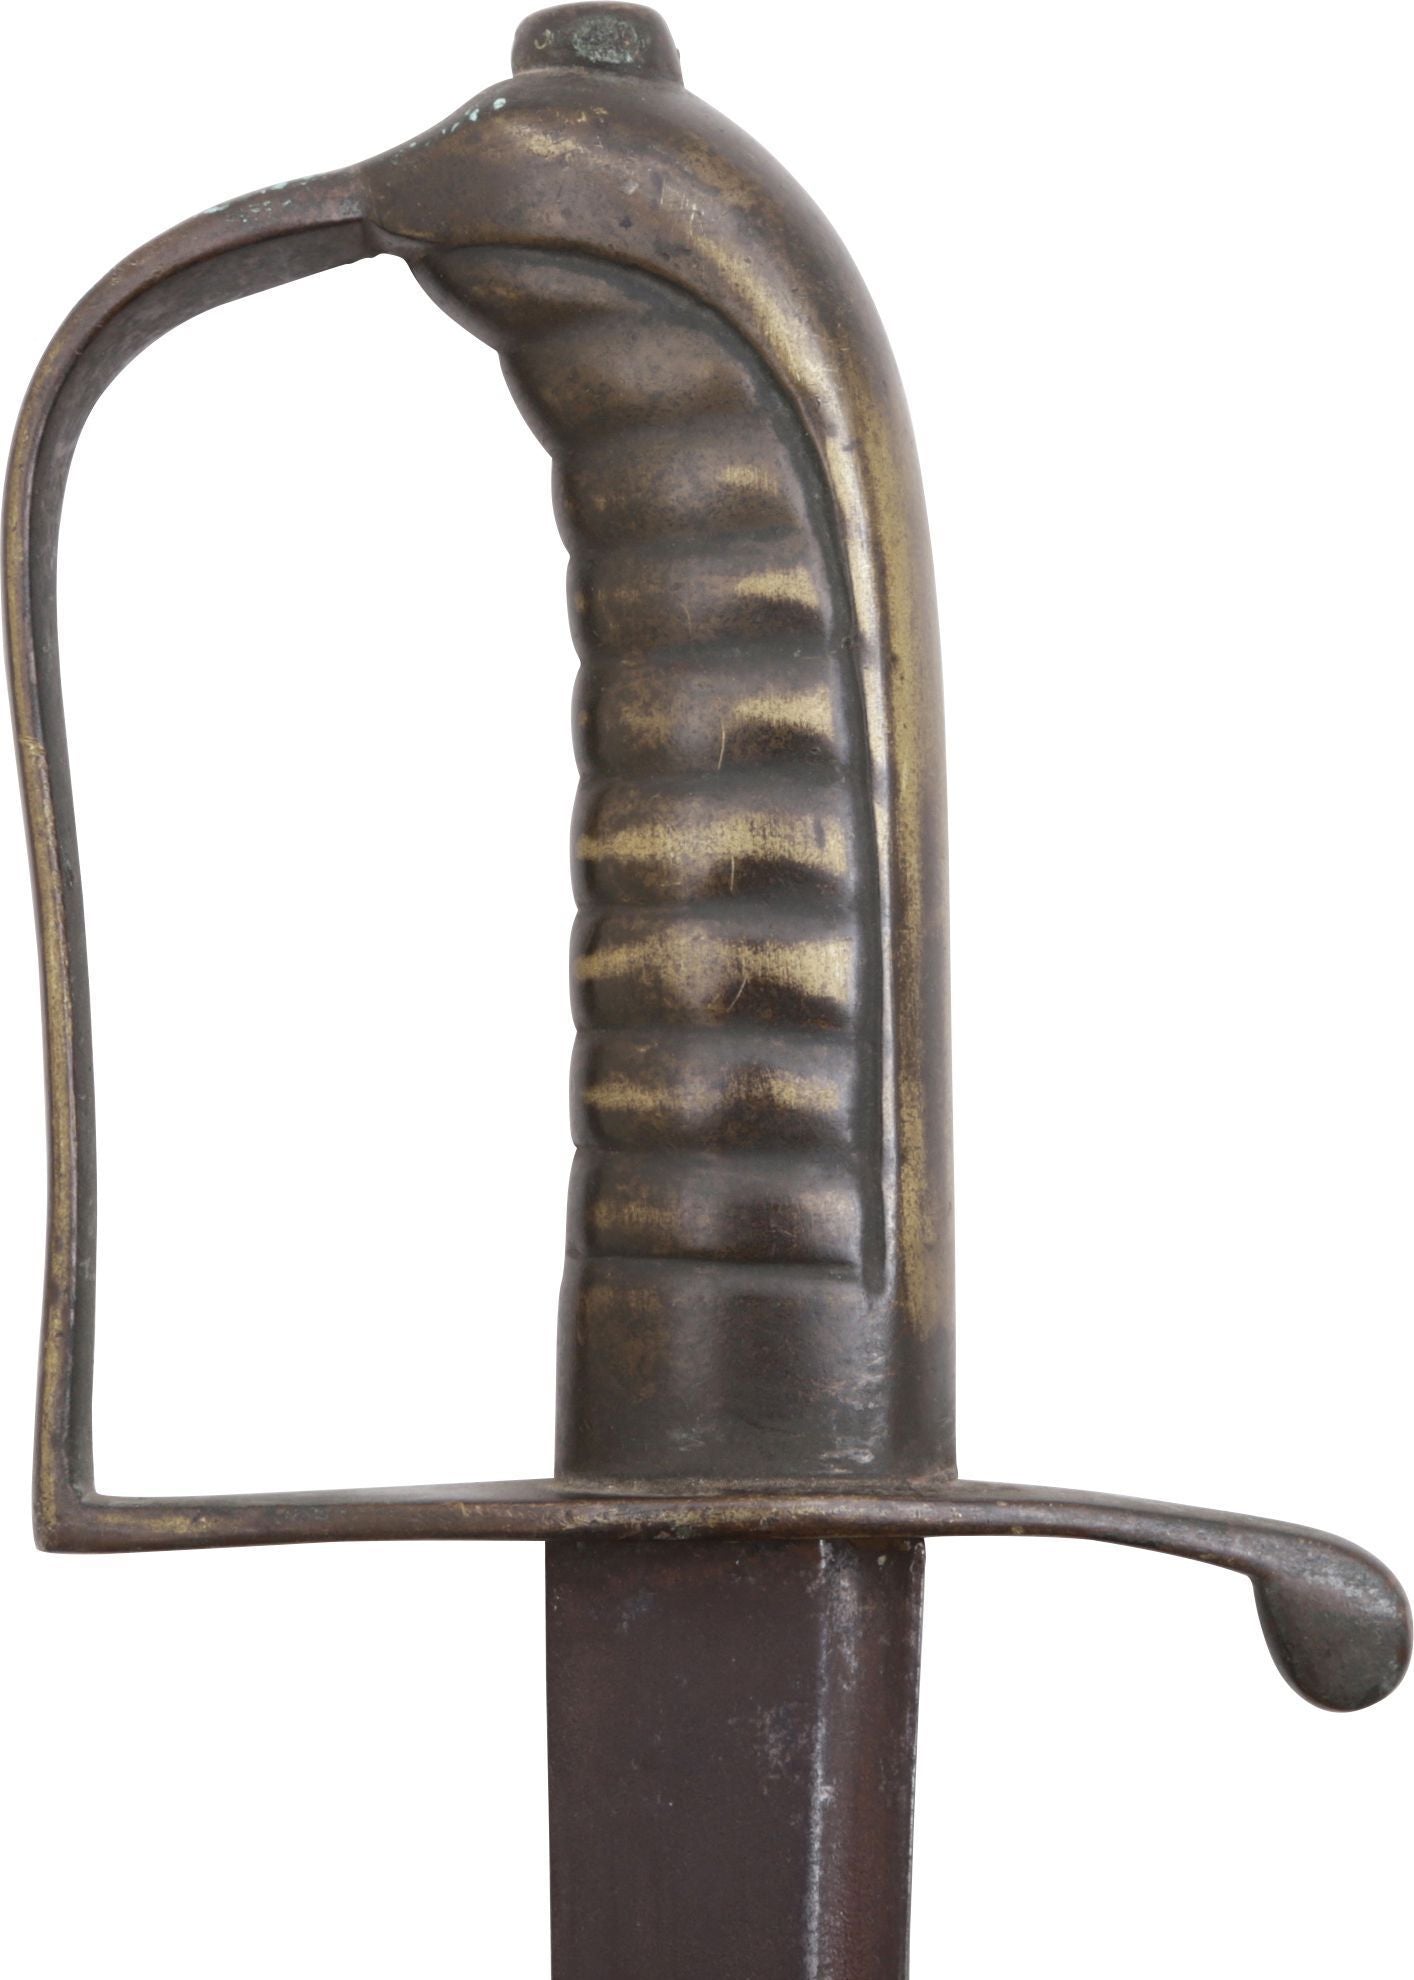 FRENCH INFANTRY HANGER - Fagan Arms